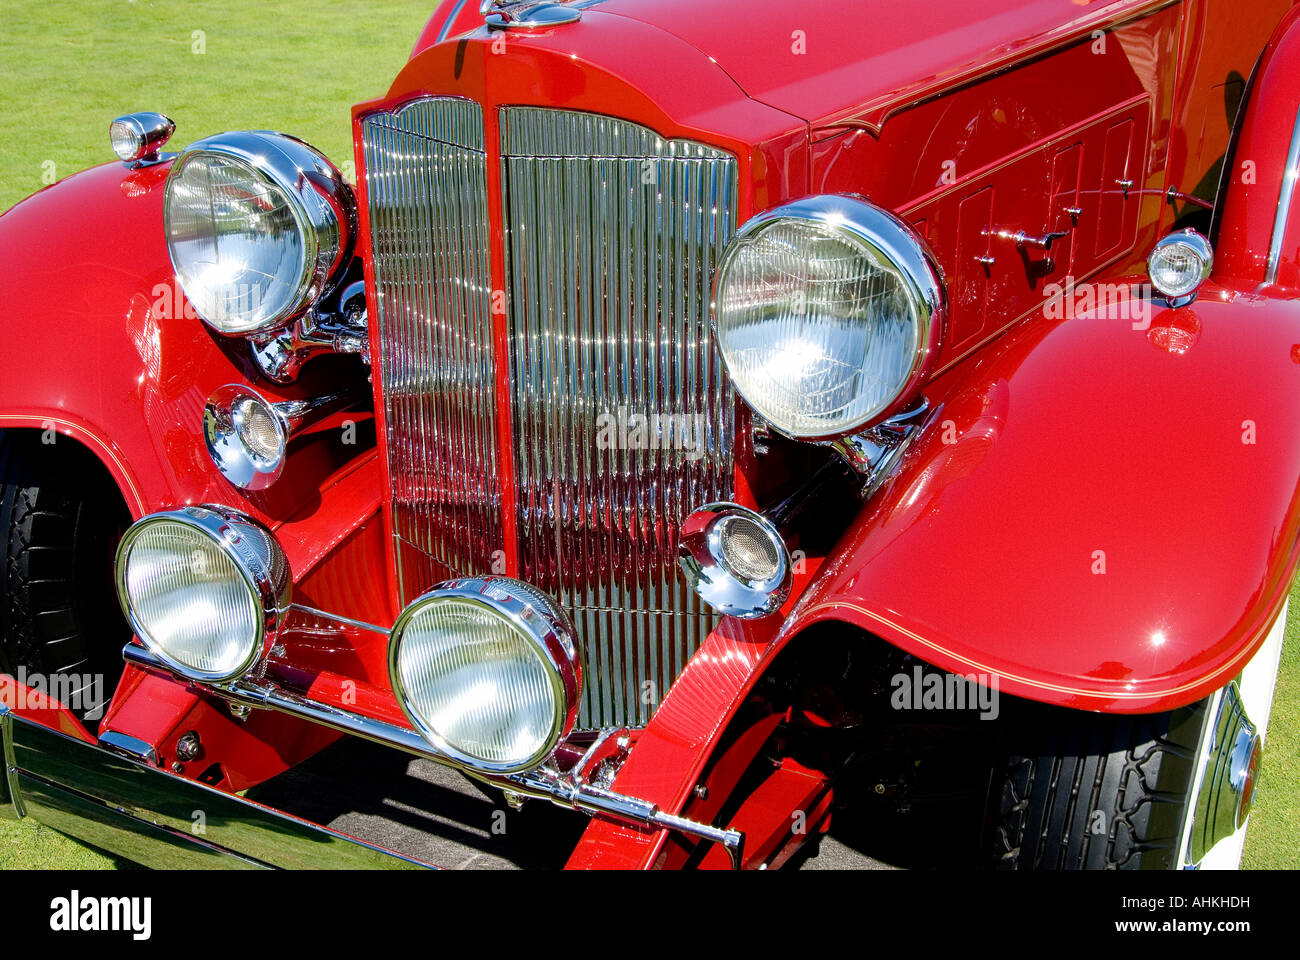 Red Vintage Car Stock Photo